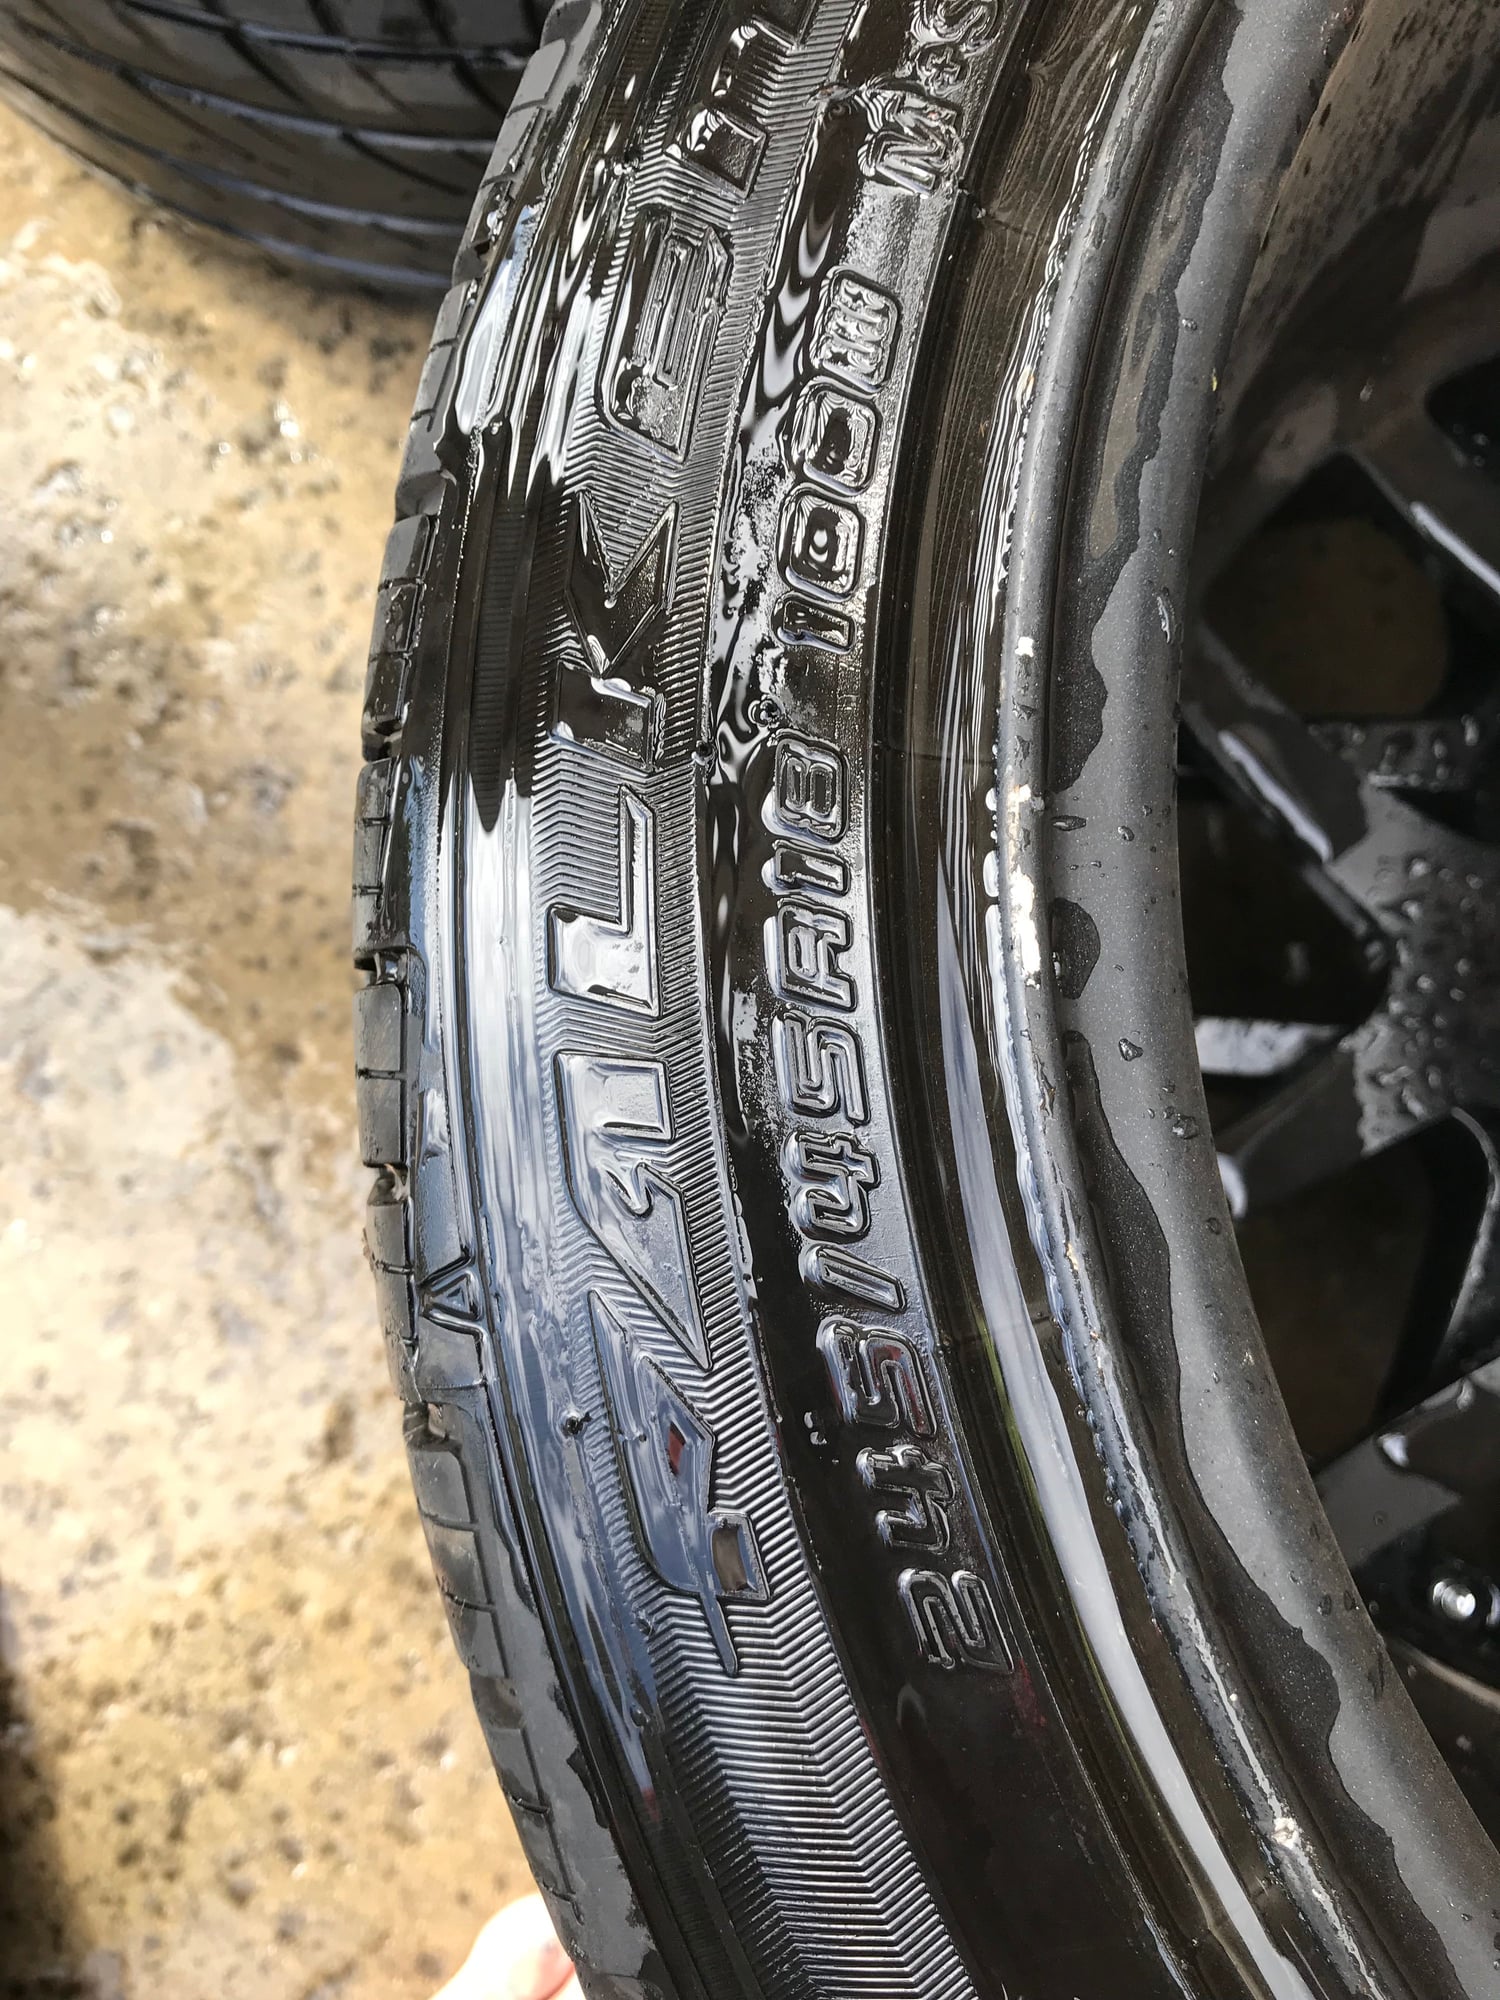  - C5 corvette 18" knock off wheels with tires- Mission Viejo ca - Mission Viejo, CA 92692, United States